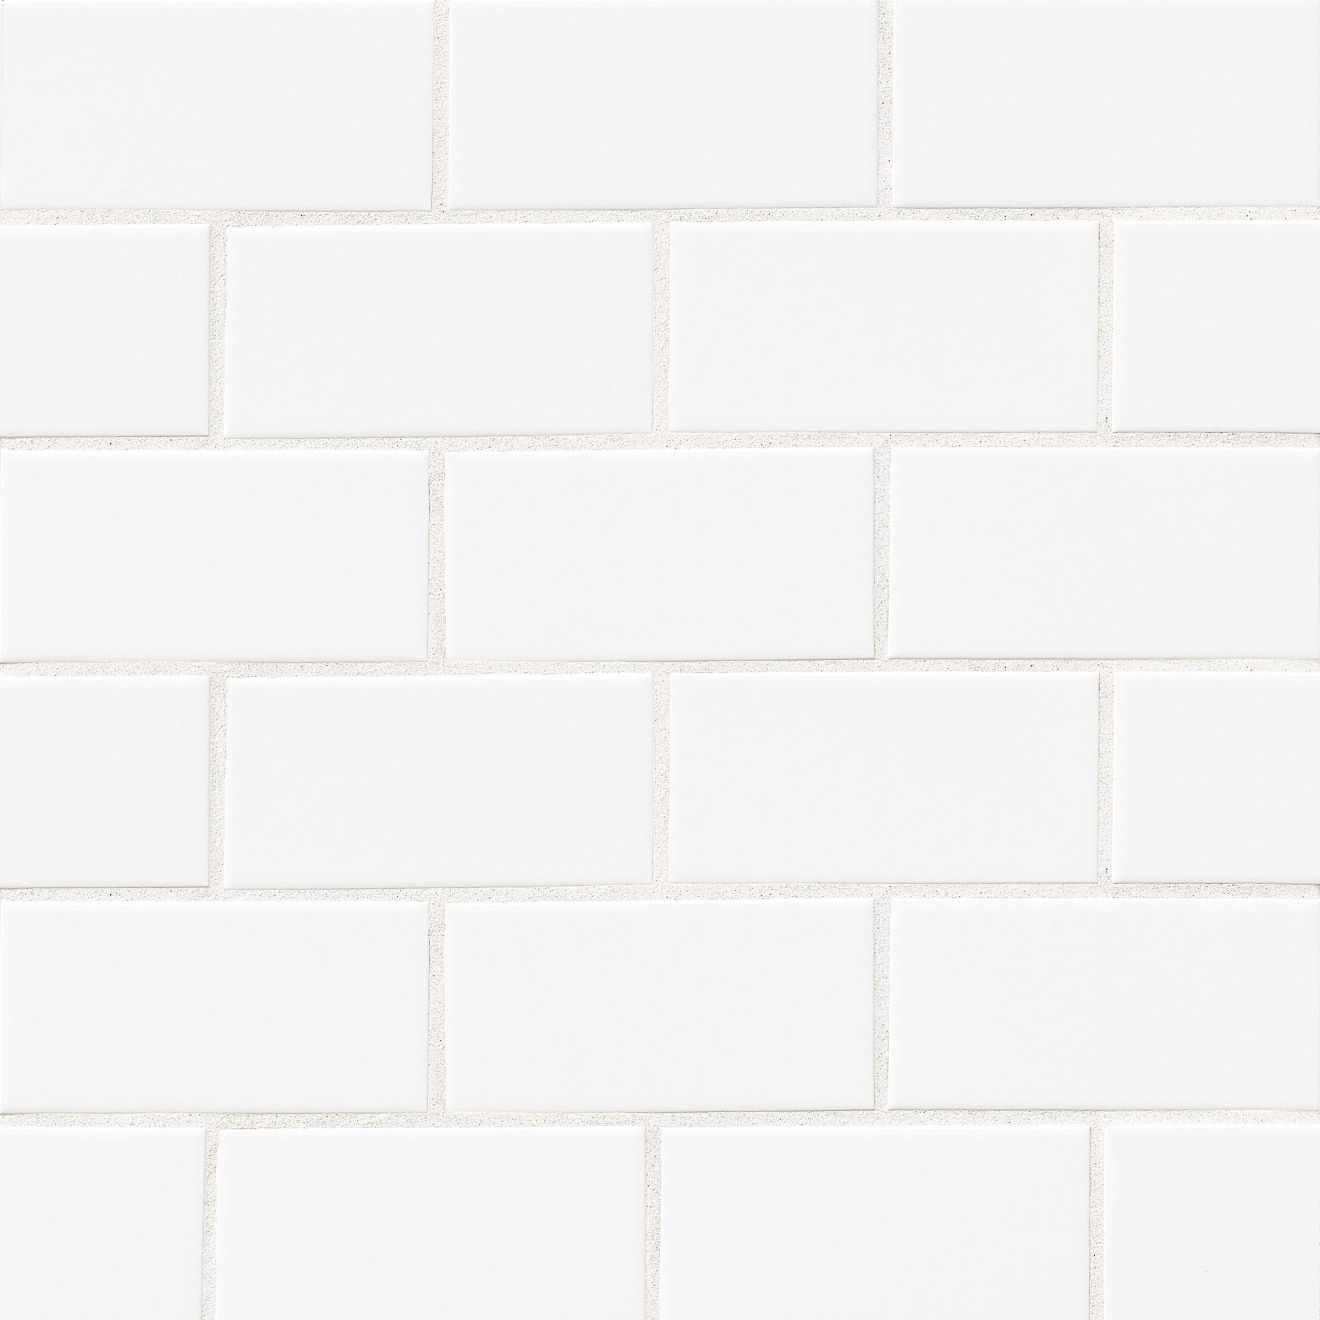 Traditions 3" x 6" Glossy Ceramic Tile in Ice White | Bedrosians Tile & Stone